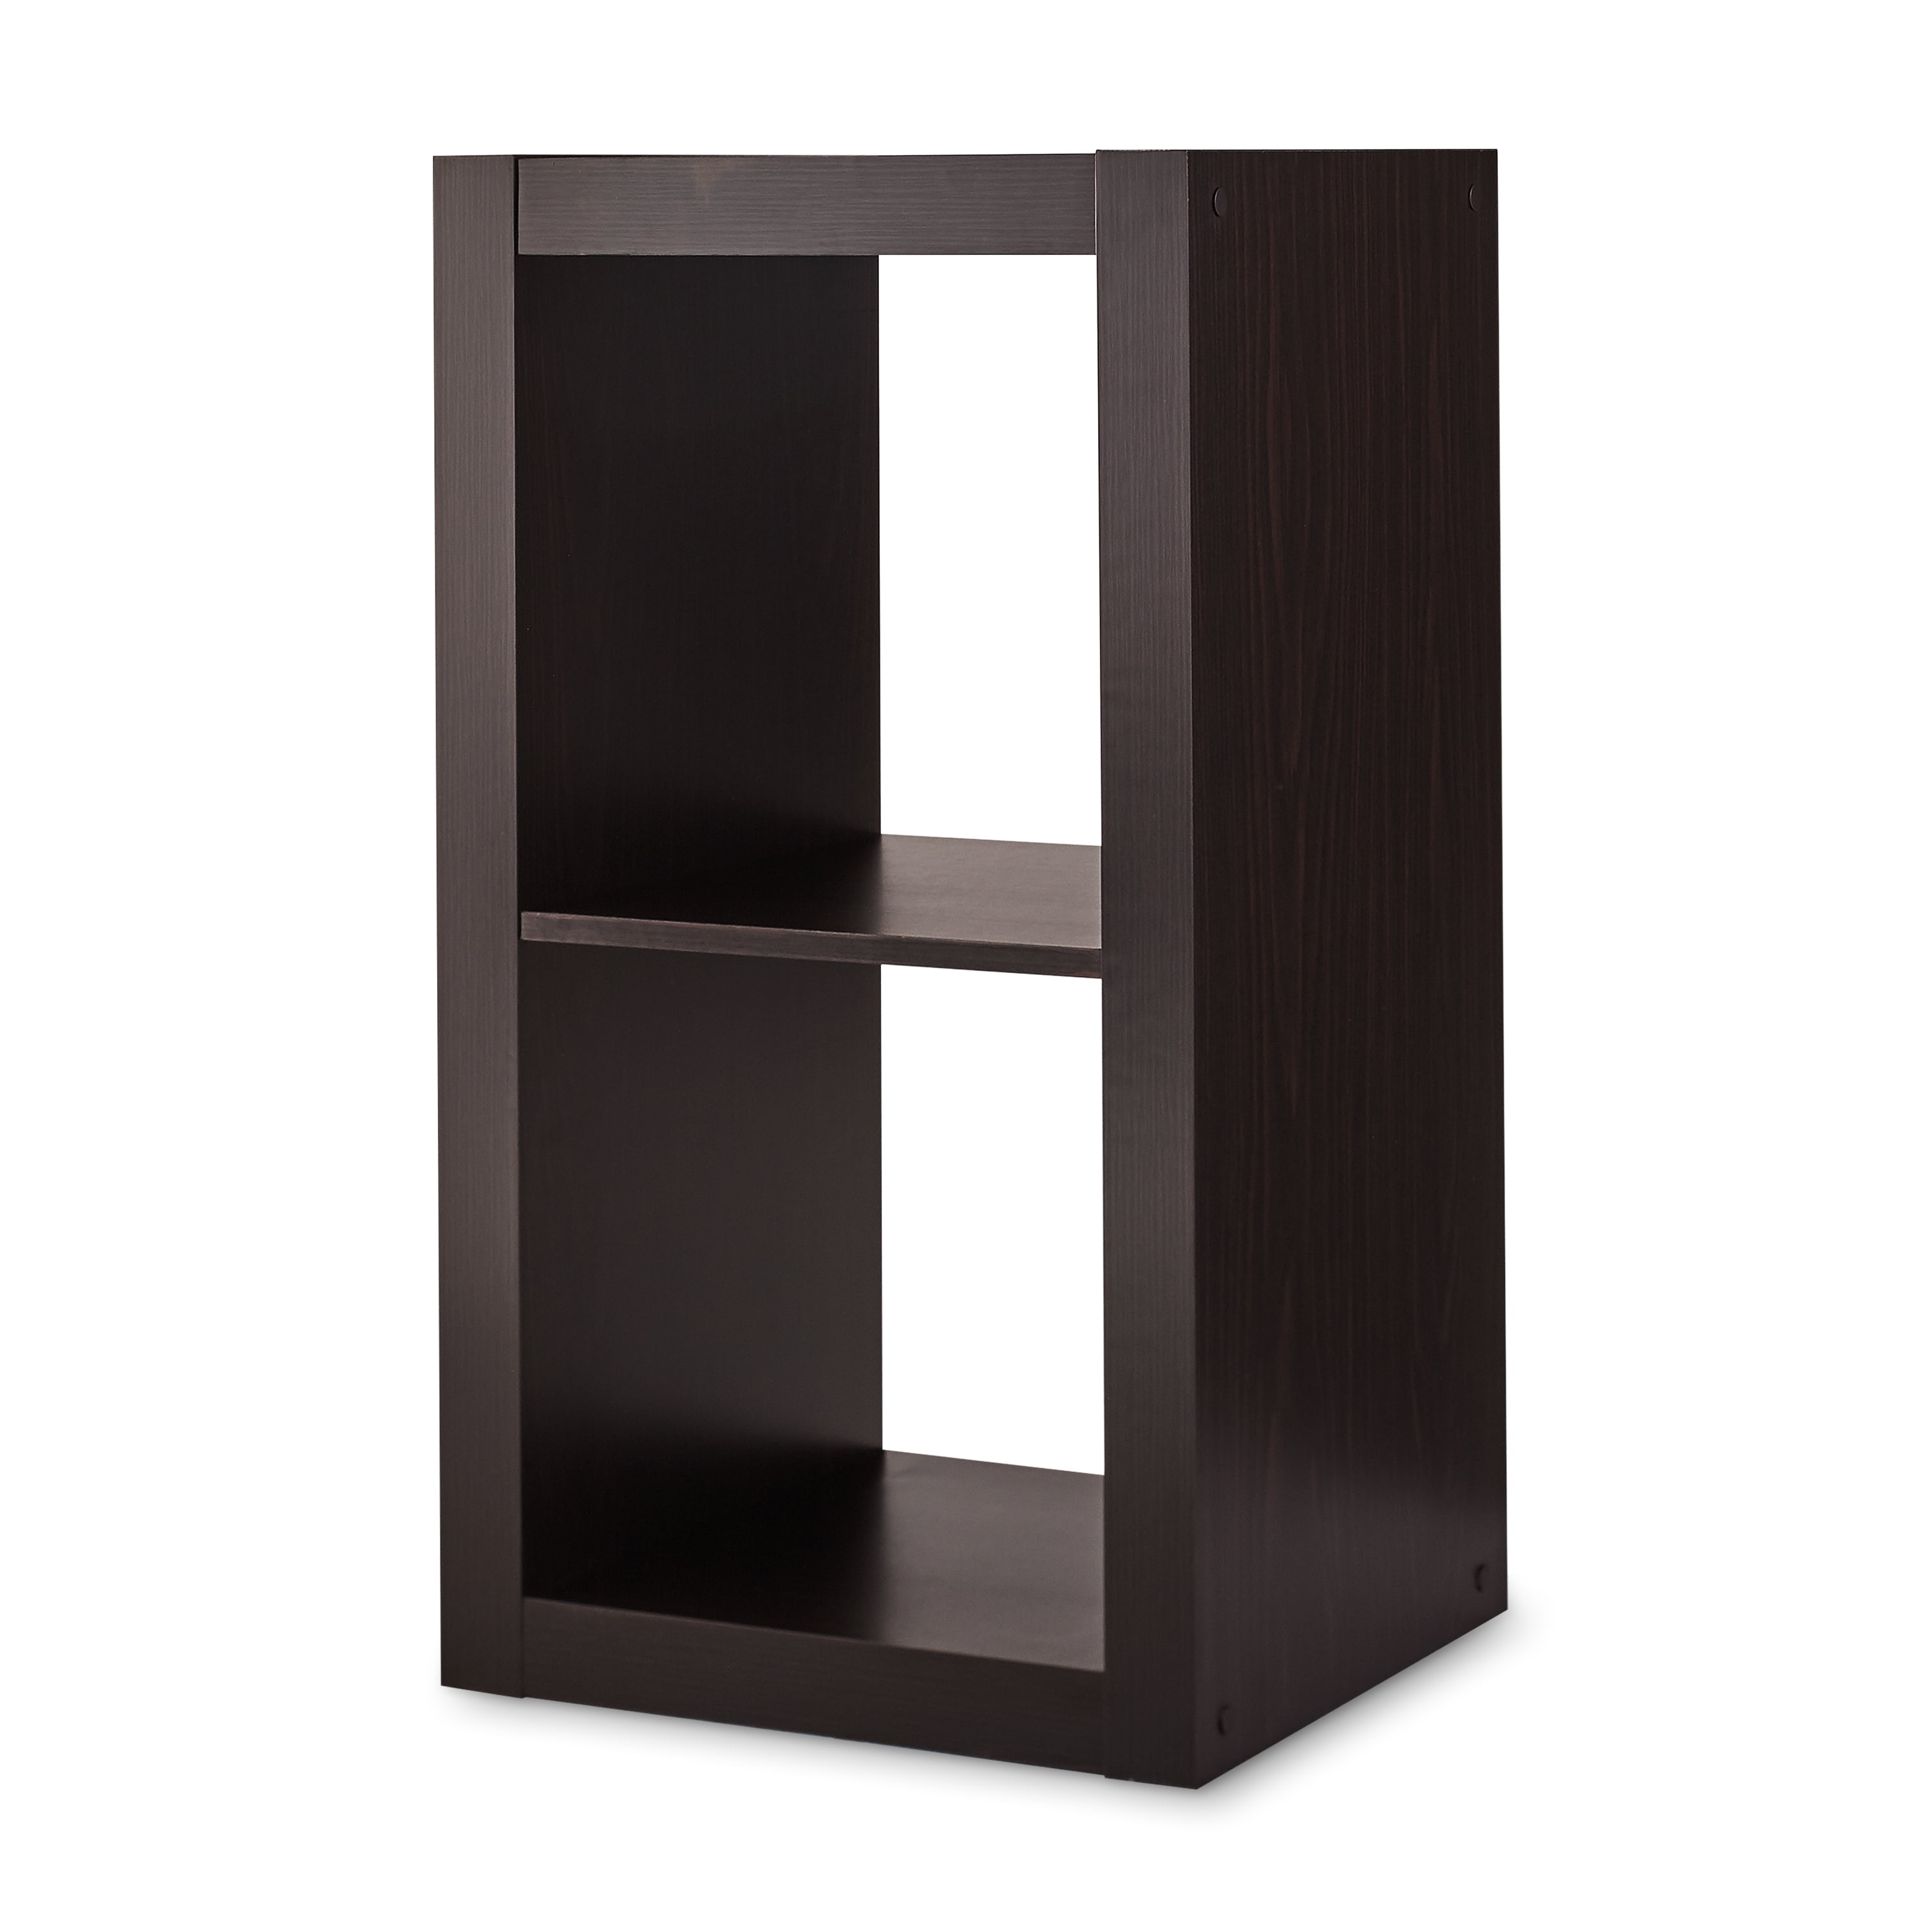 Brown Finish Bookshelf Square Storage Cabinet 2-Cube Organizer Better Homes and Gardens. Set of 2 and Table Top Decoration Bundle